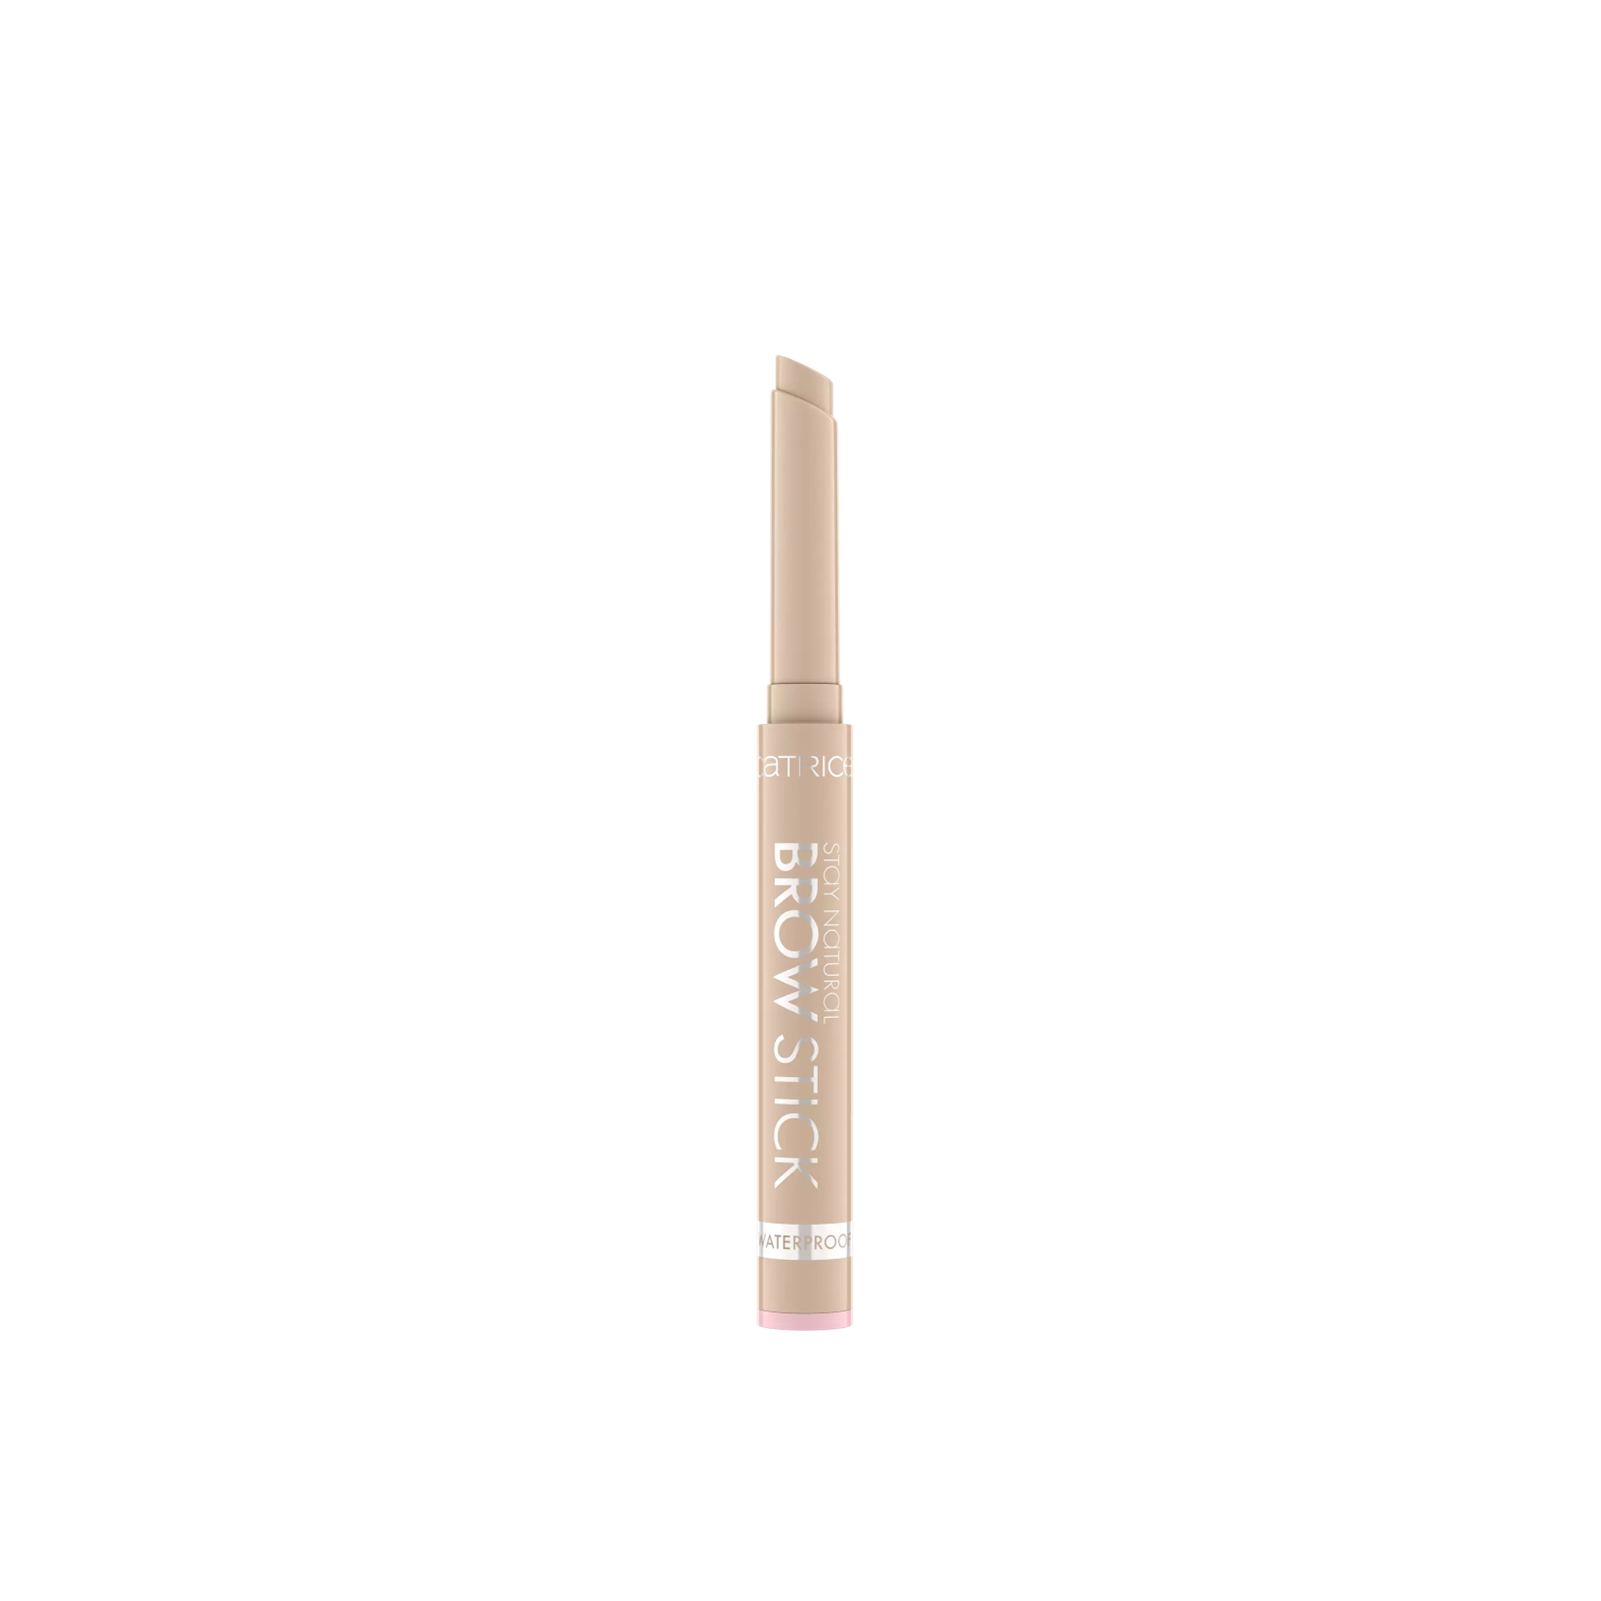 Soft Brow Catrice Waterproof Buy Stick Natural Blonde · oz) USA Stay 1g (0.03 010